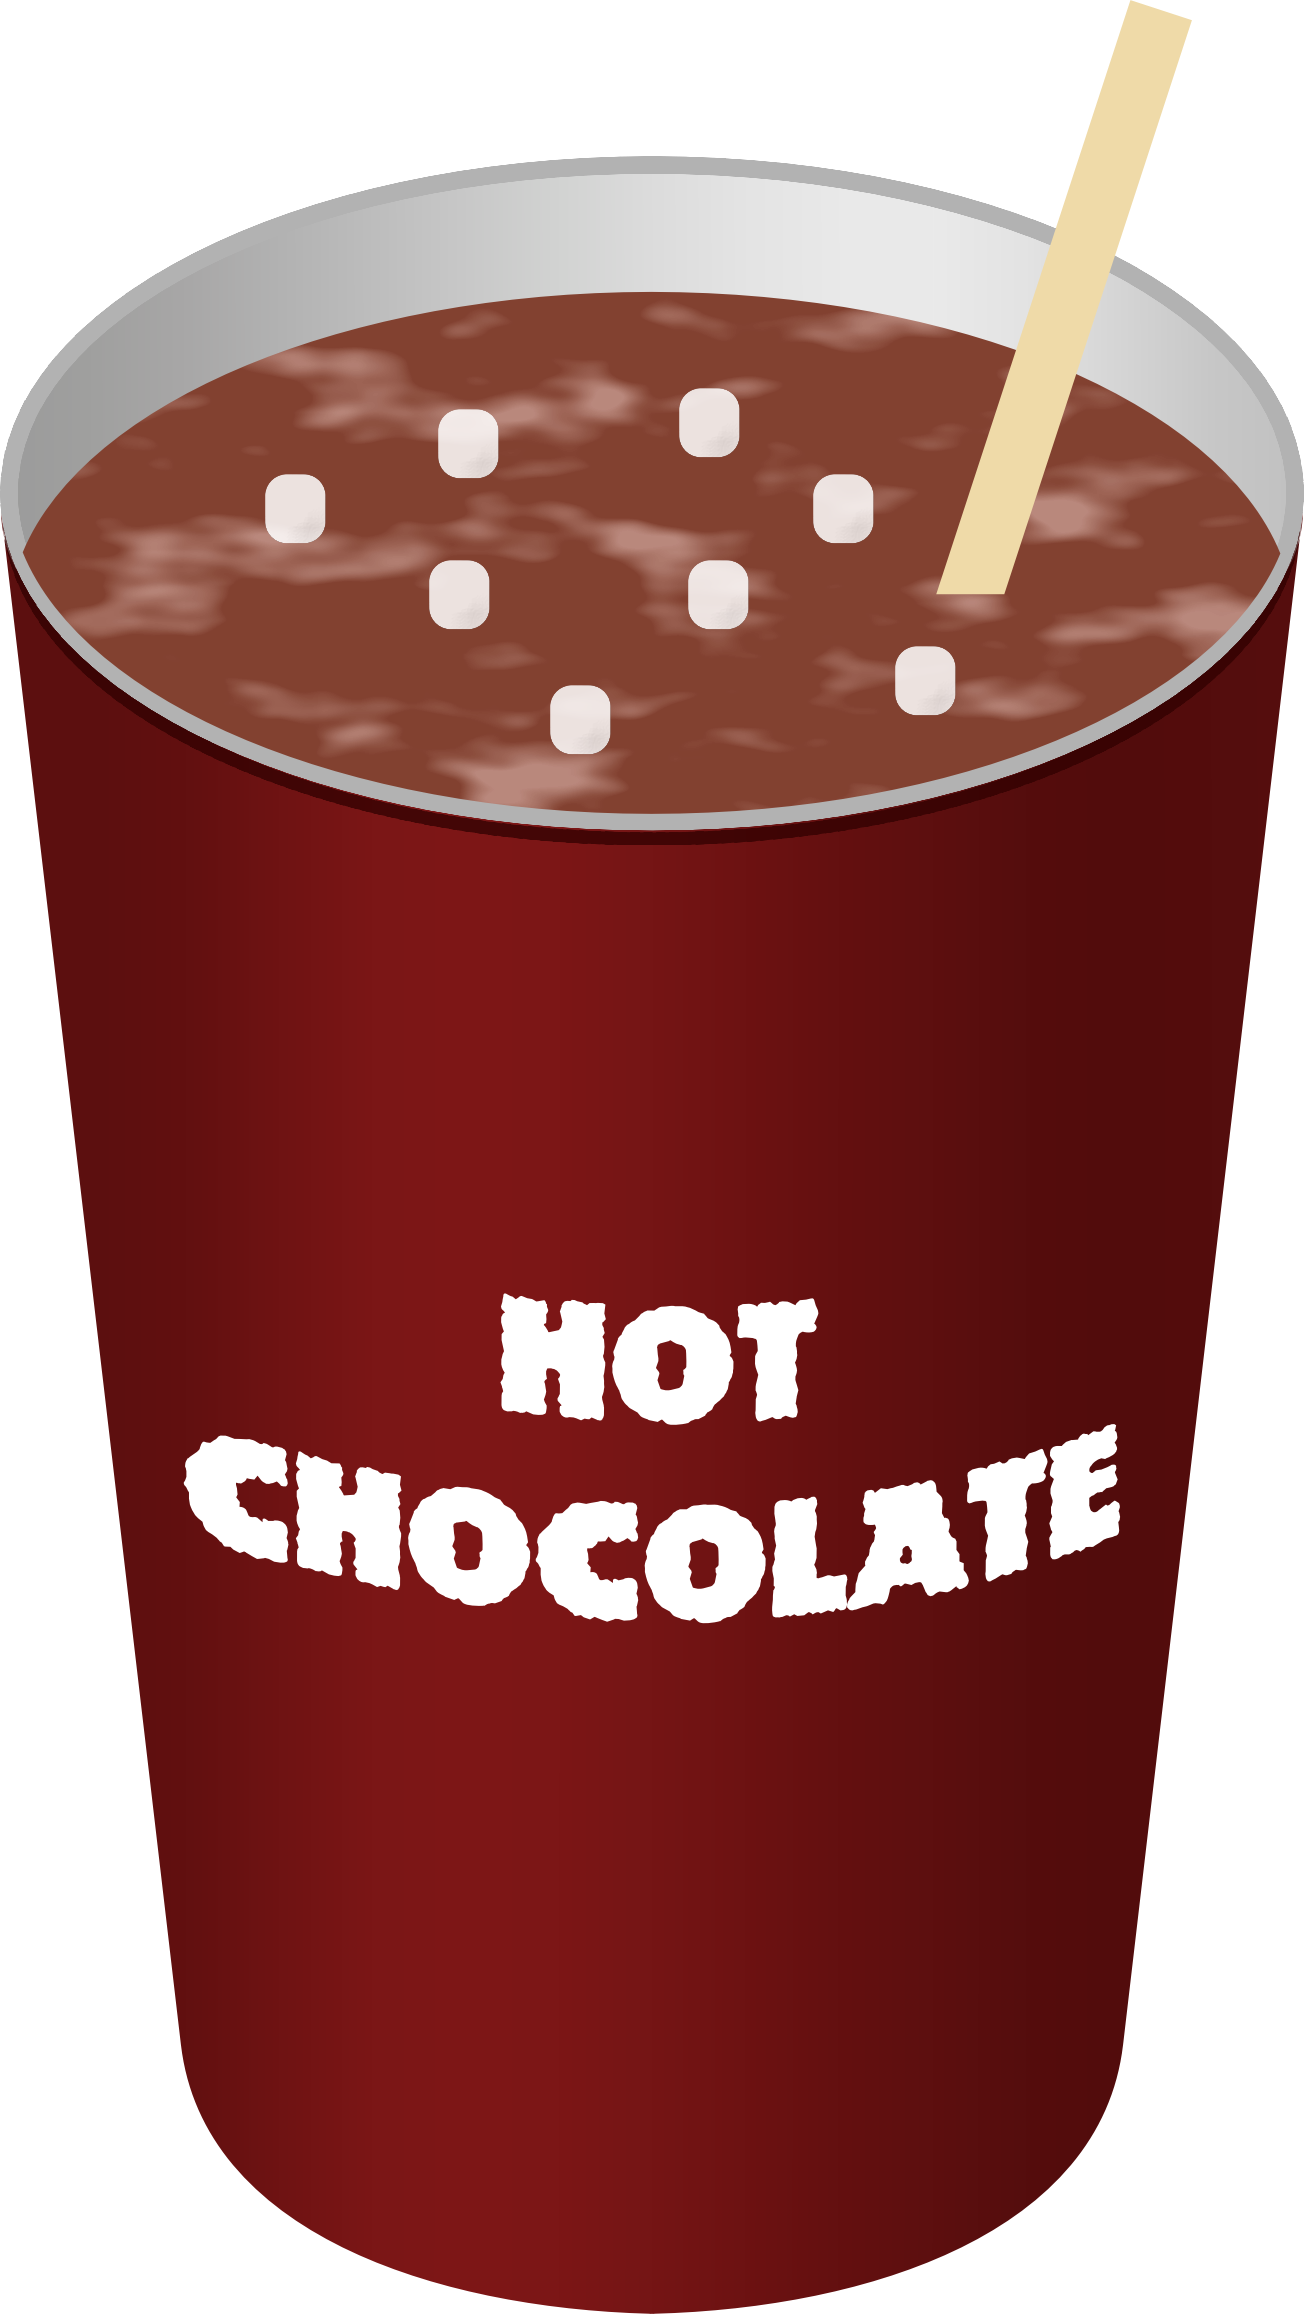 Hot Chocolate Images Clipart.